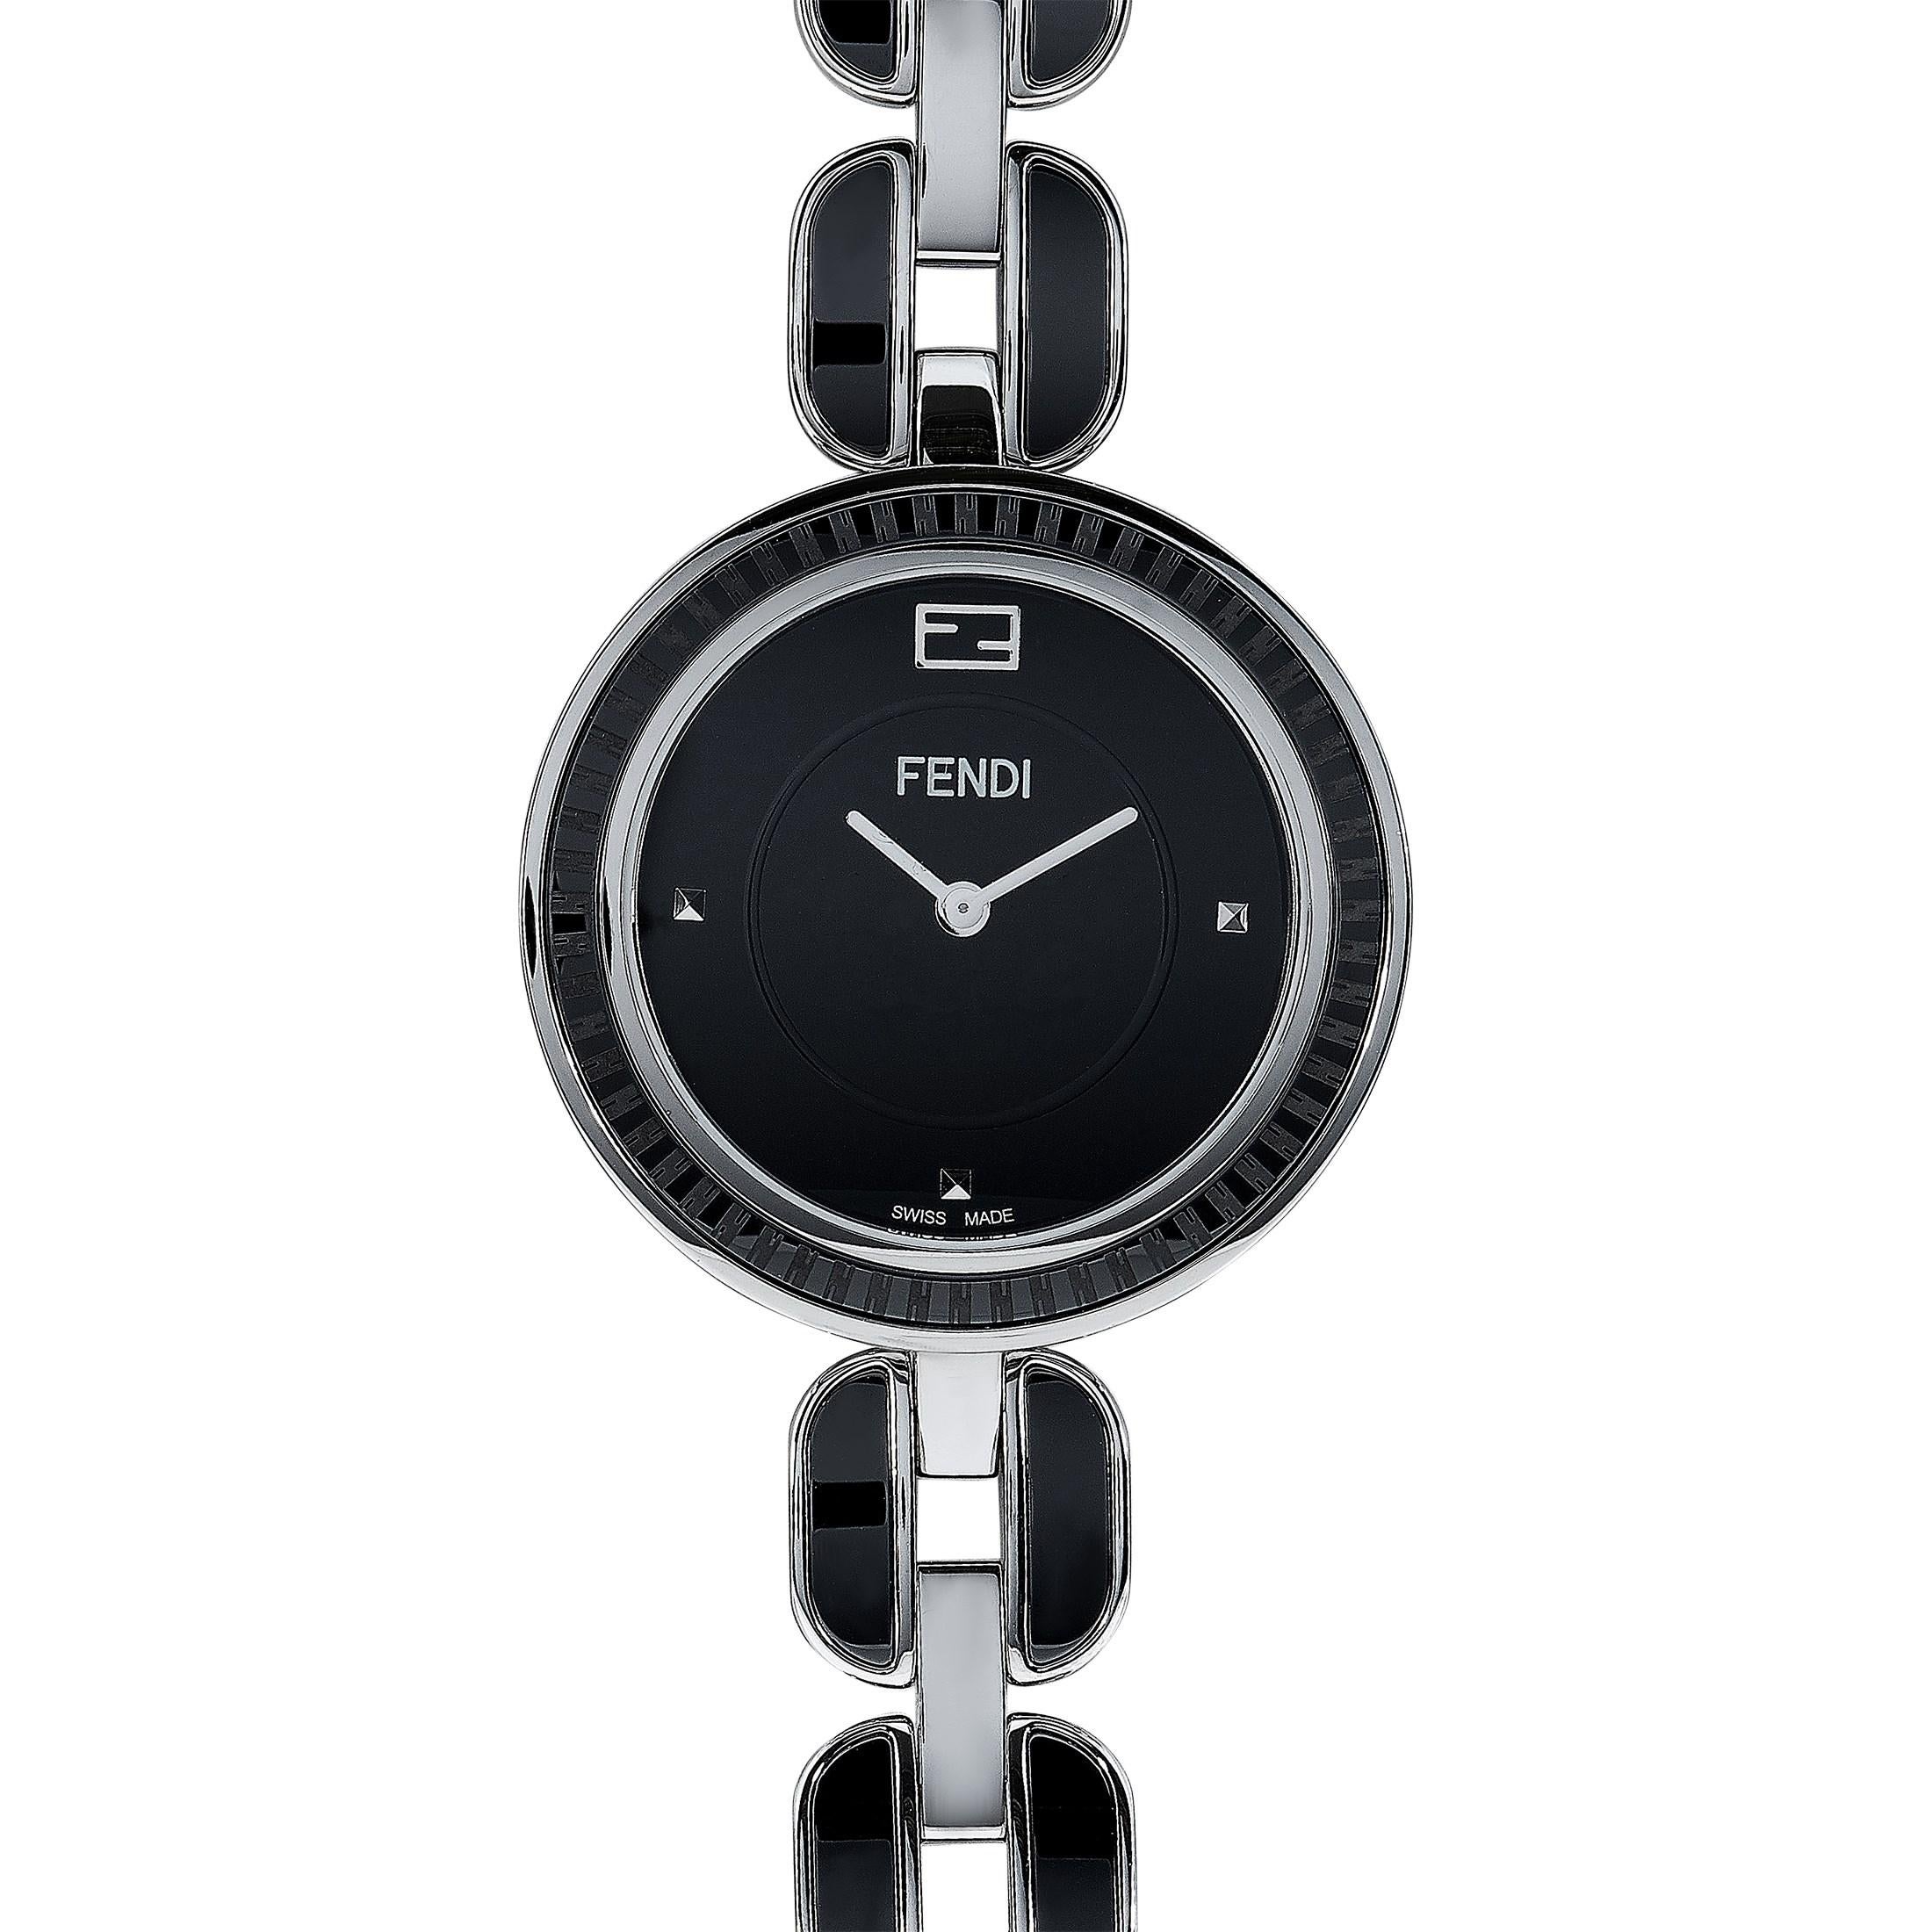 The Fendi My Way watch, reference number F353031001, comes with a 36 mm stainless steel case that boasts a bezel with a black ceramic inlay. The case is presented on a stainless steel bracelet with black ceramic inserts. This model is powered by a